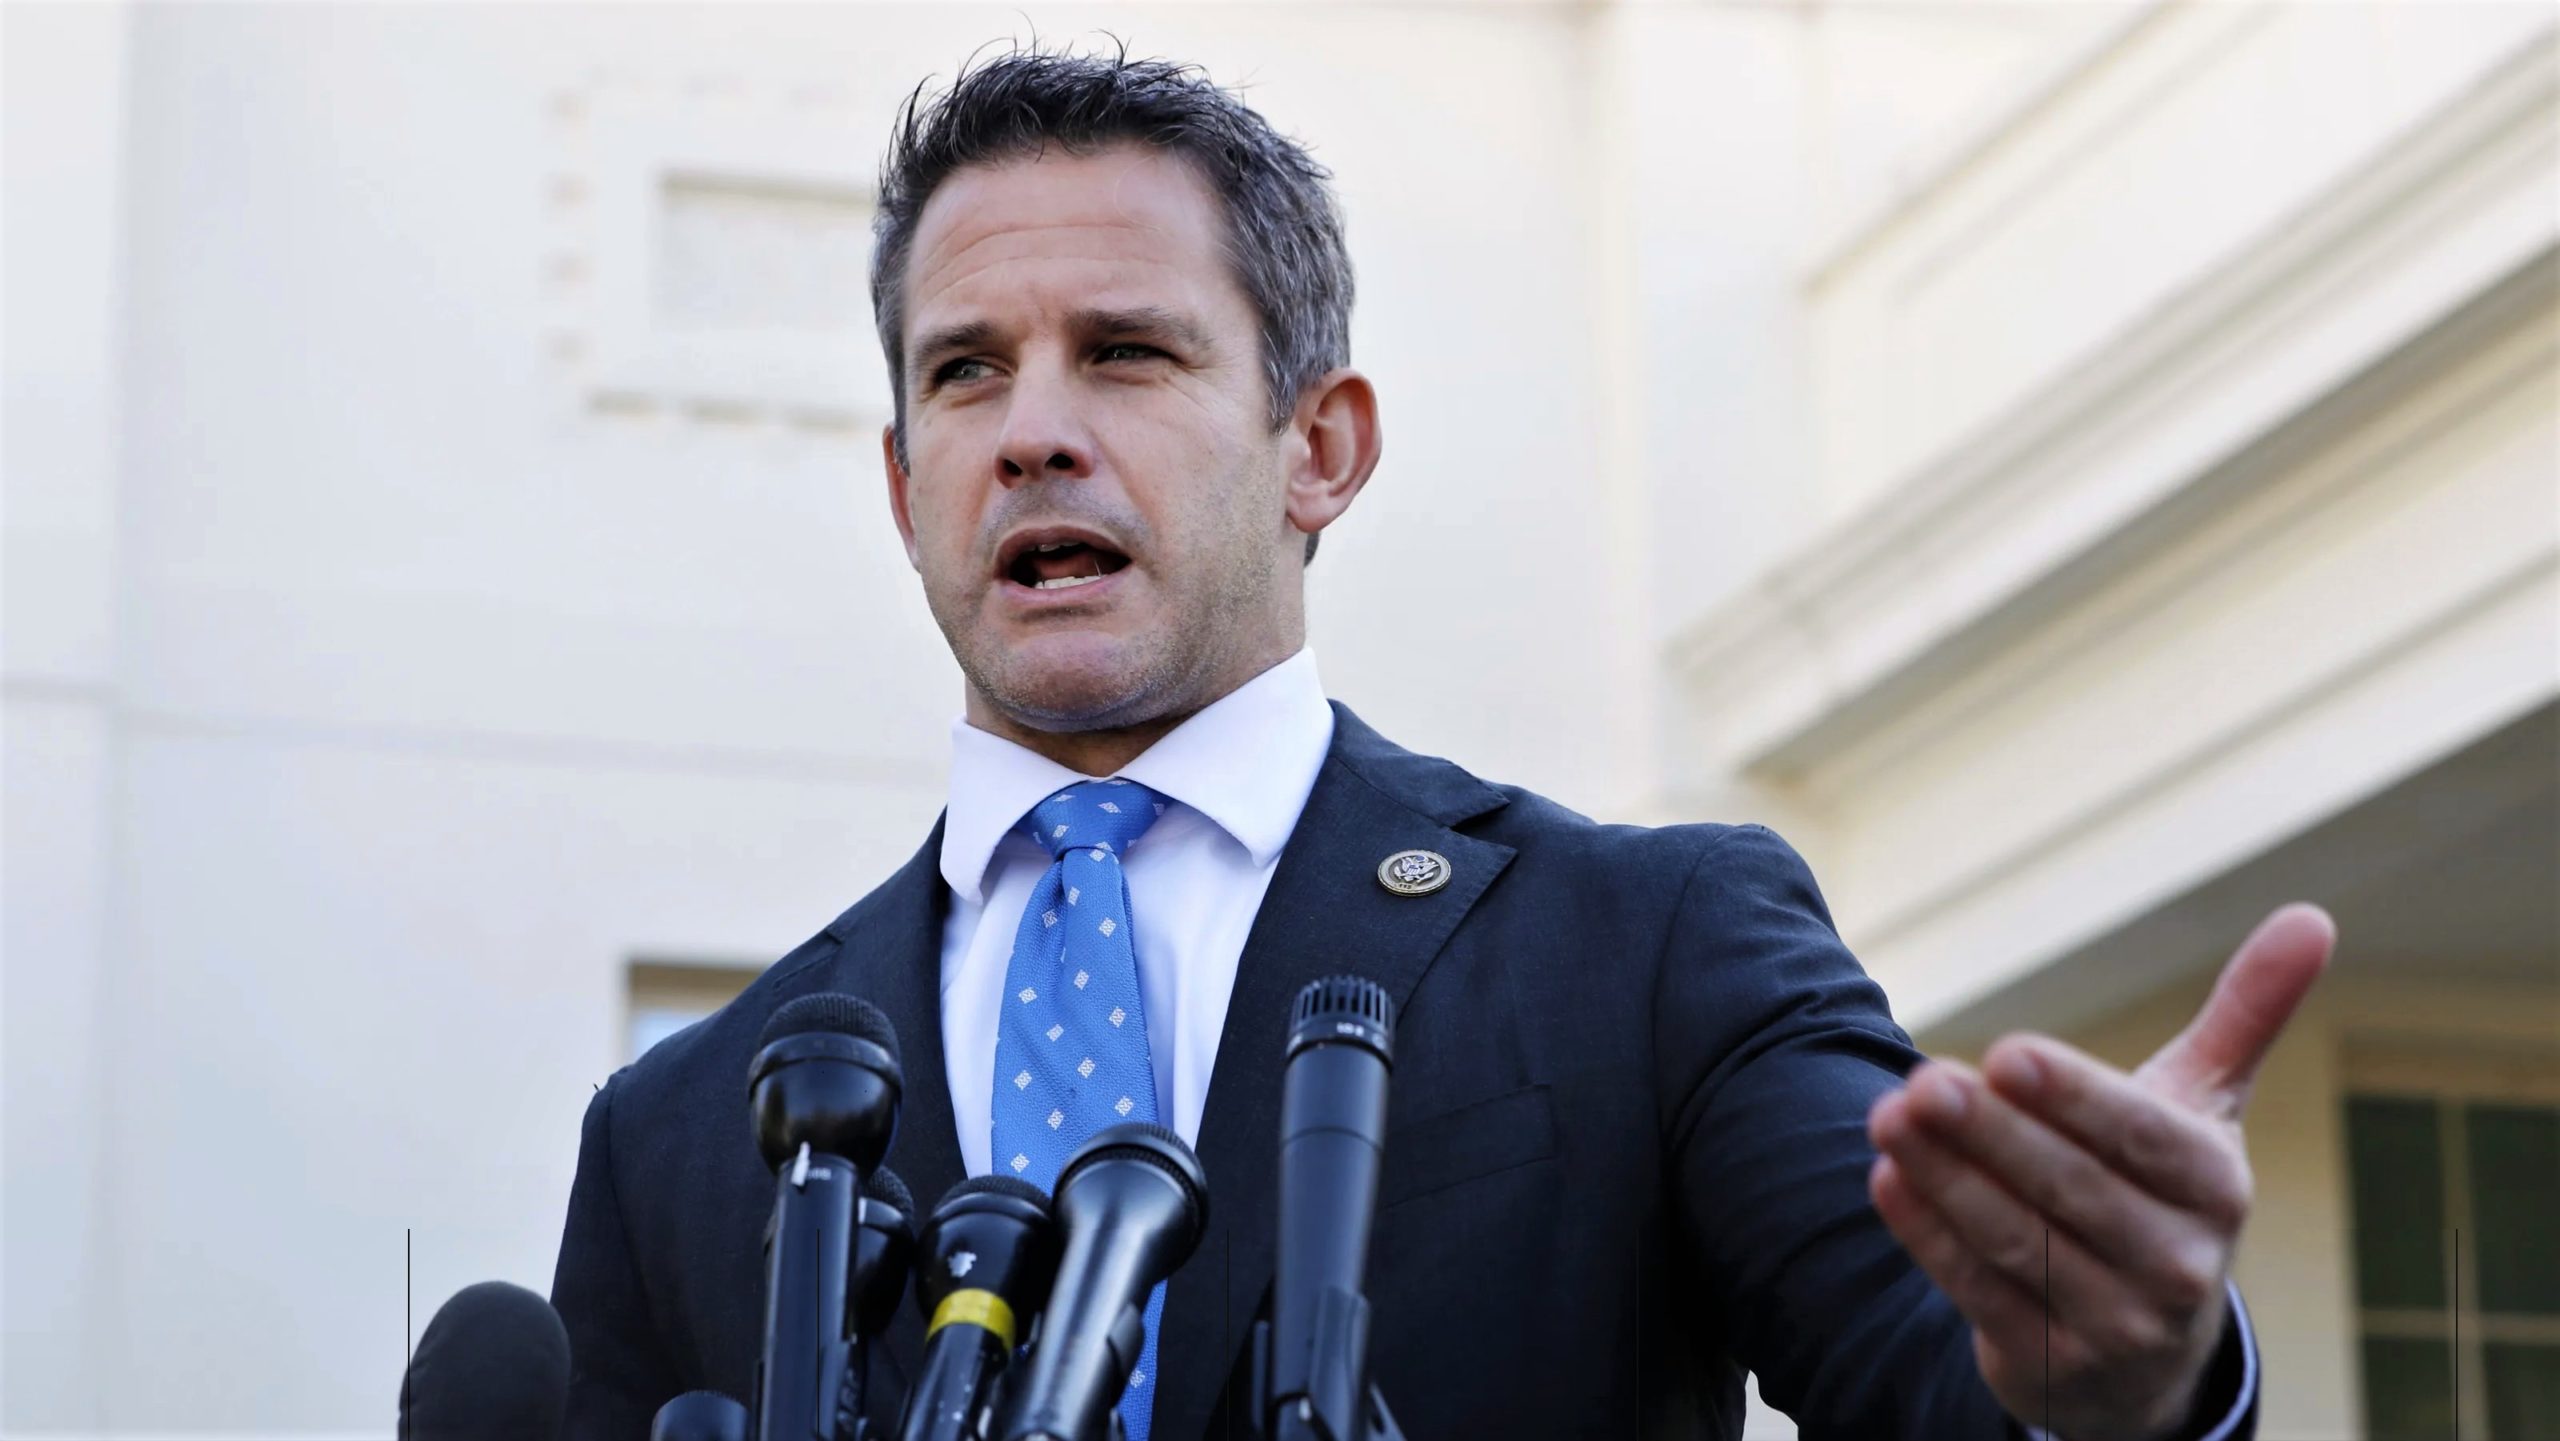 Featured image for “Fact, Fiction and Adam Kinzinger”